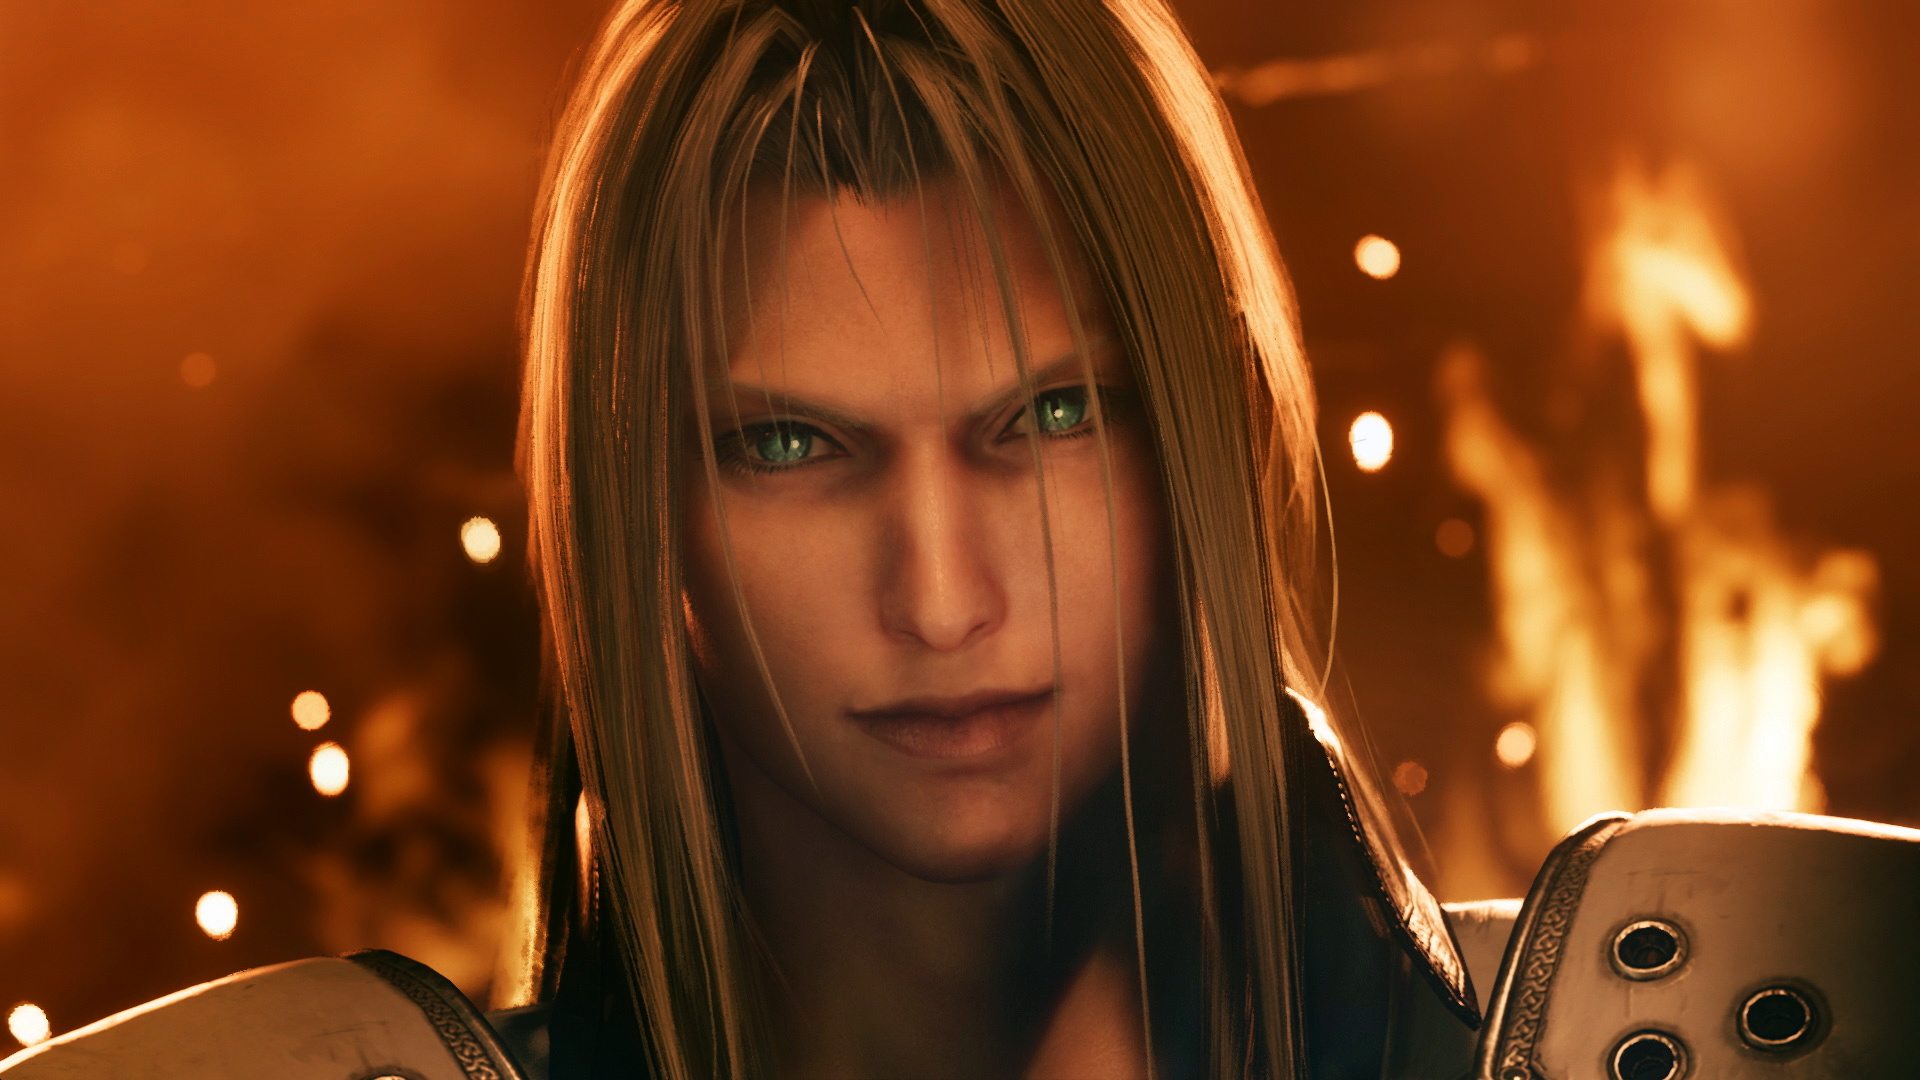 E3 2019: Final Fantasy VII Remake Is Being Developed as a PS4 and PS5